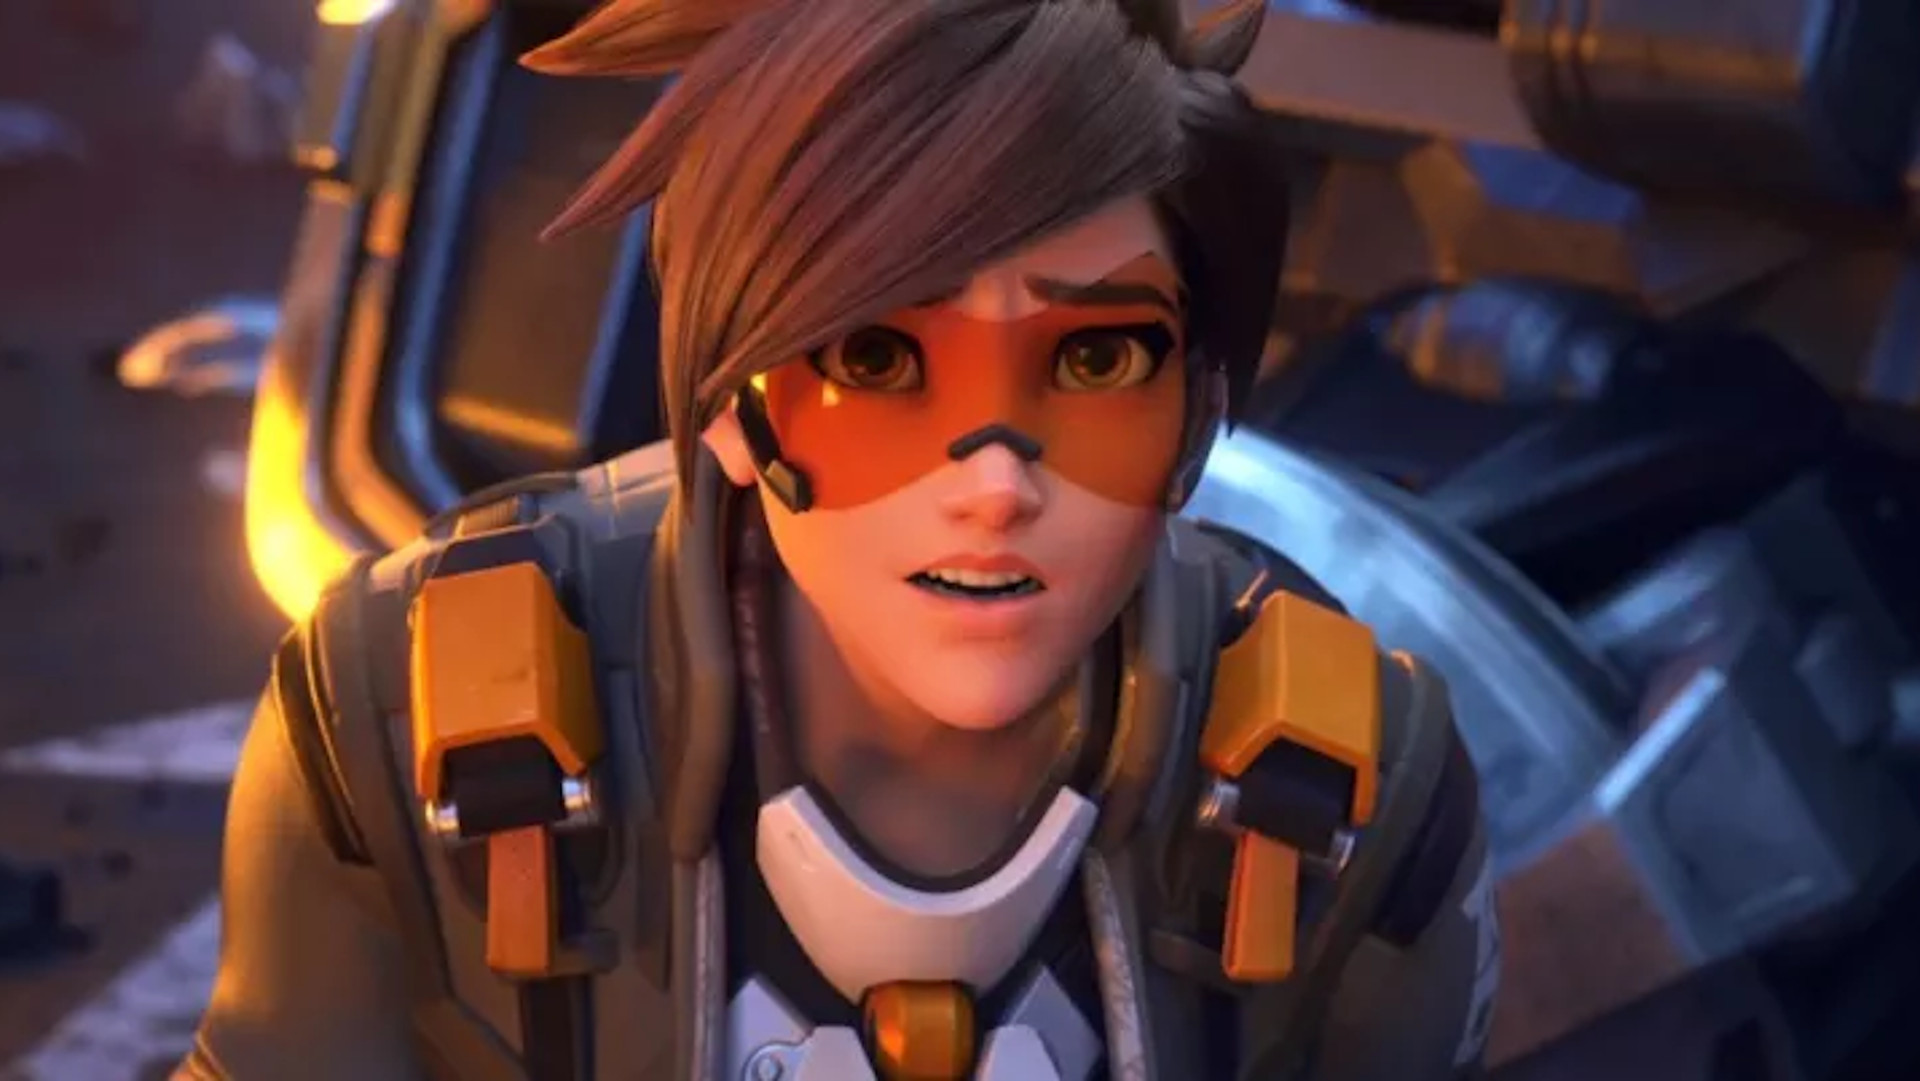 Overwatch 2 director says canceled PvE mode was part of an ambitious plan to one day make an Overwatch MMO